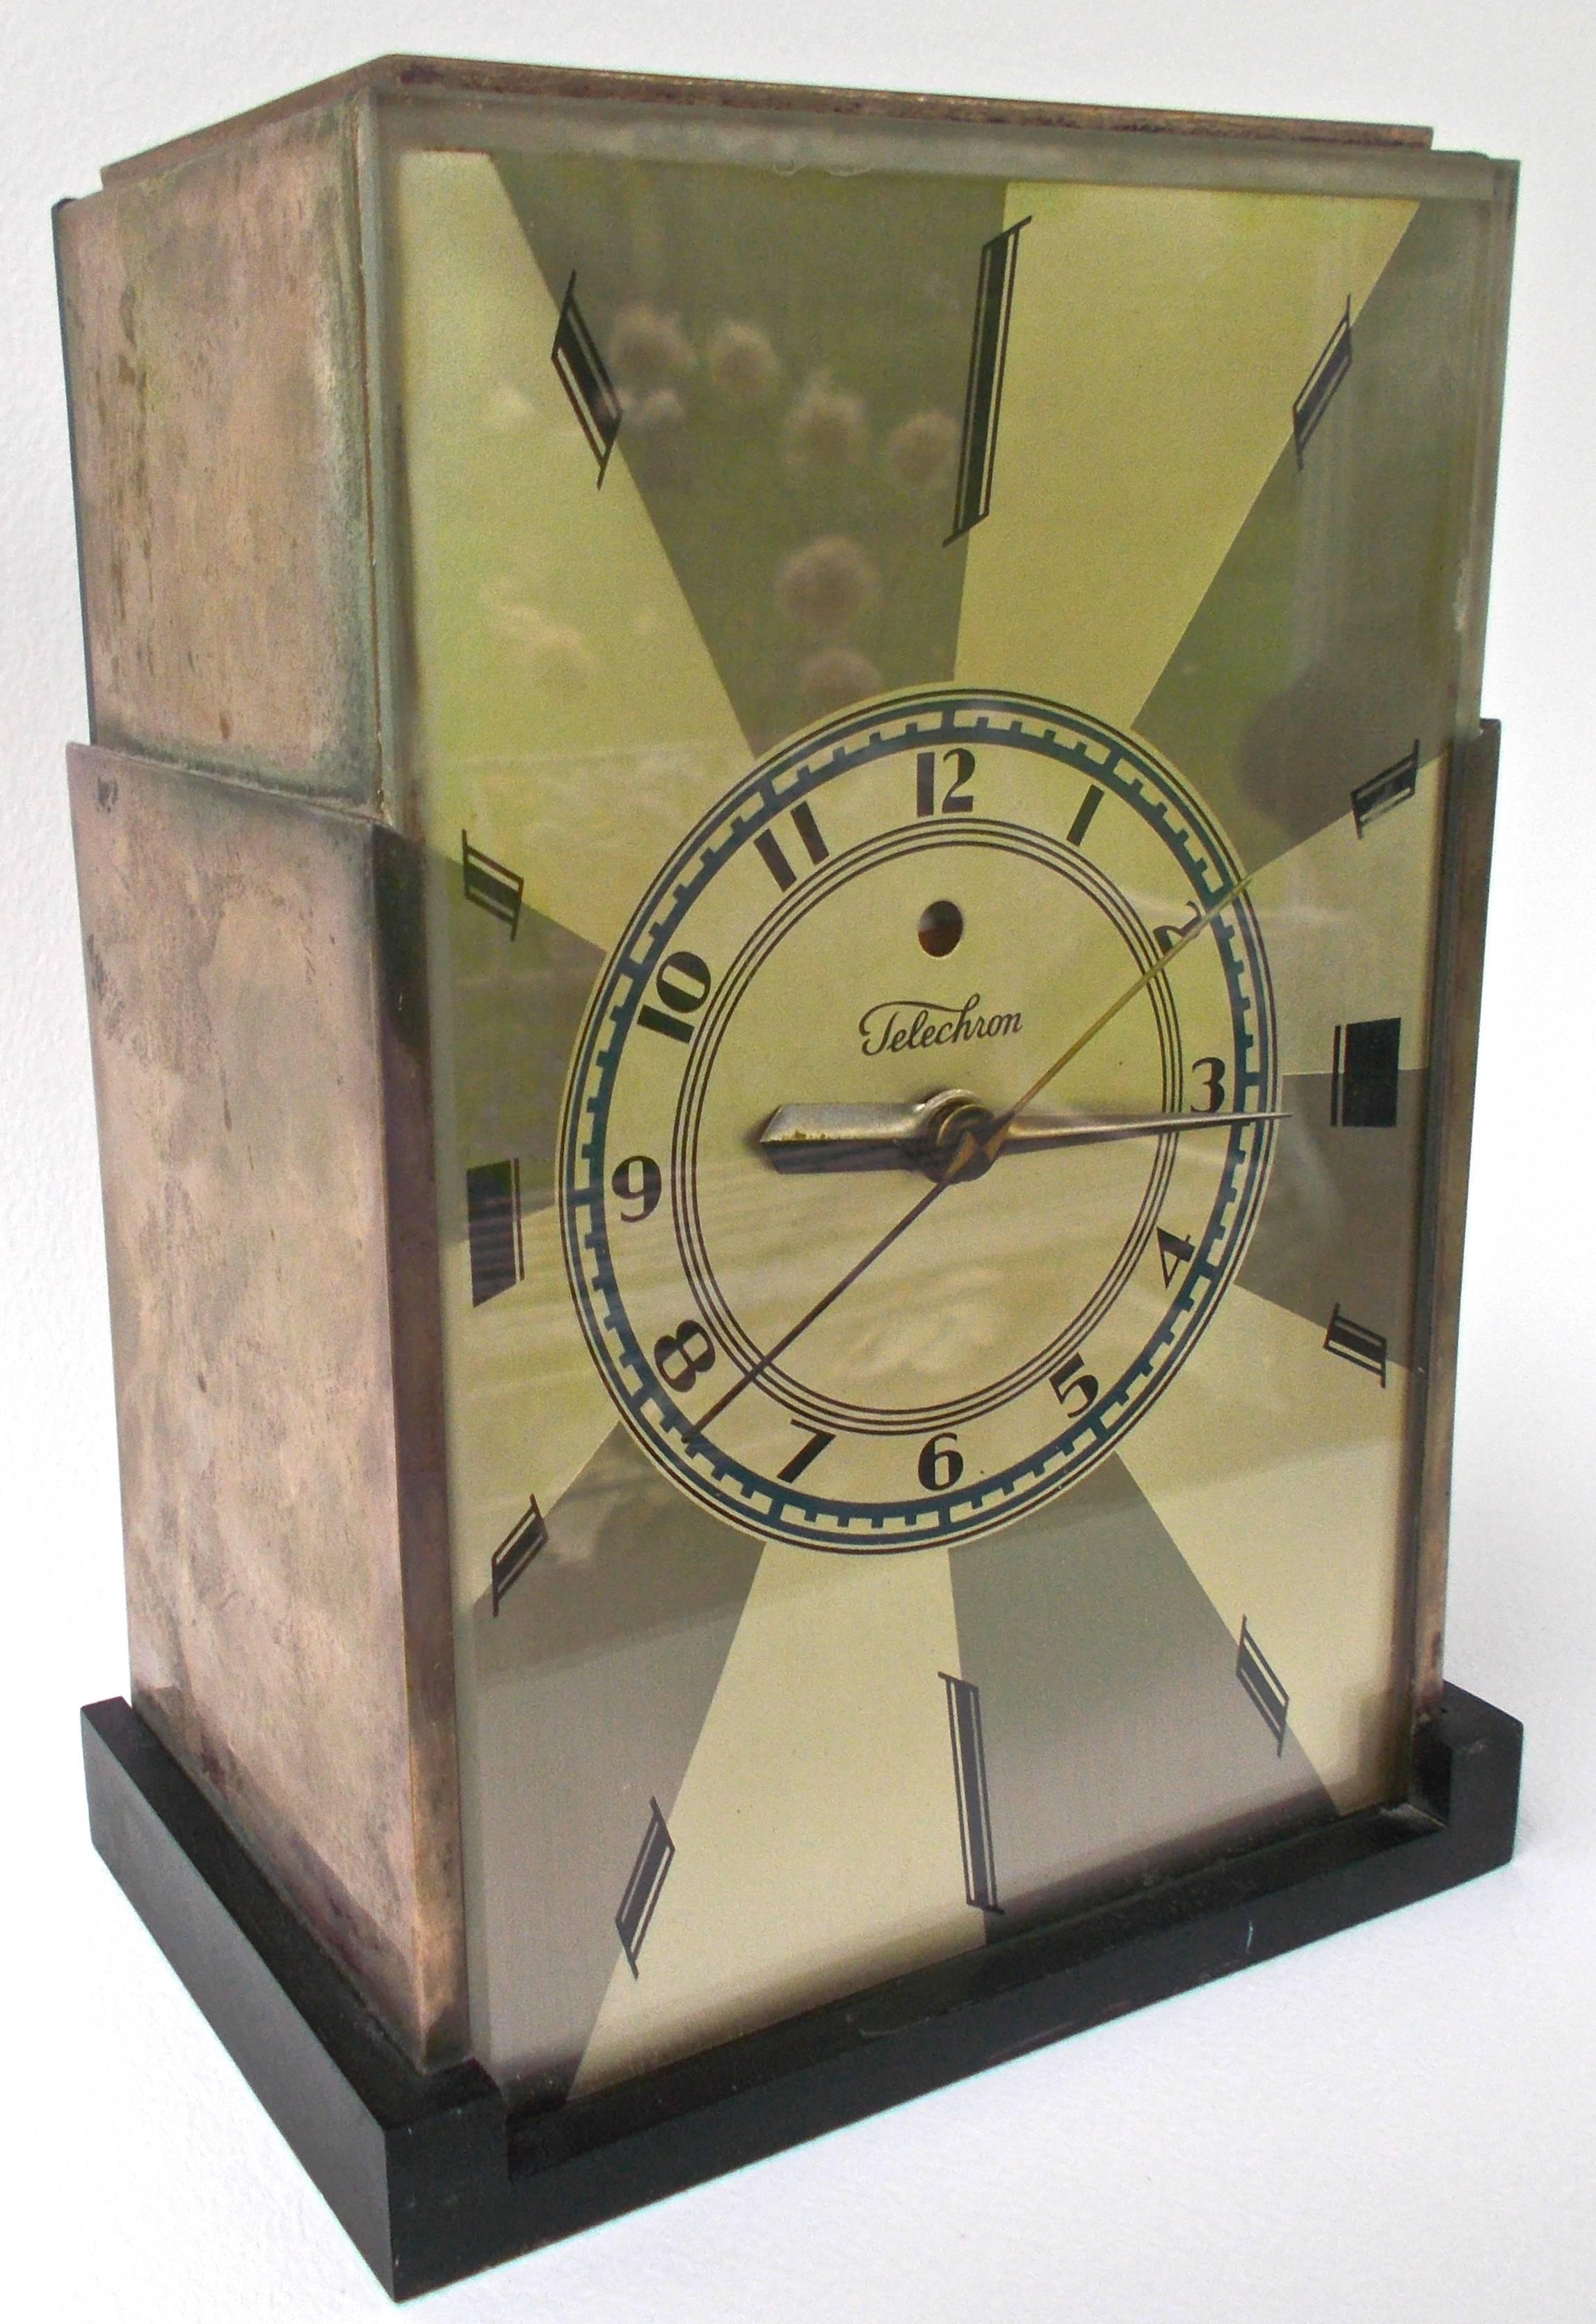 The iconic American Deco Frankl 'Skyscraper' mantel clock. Polished silver over brass with black bakelite base. This rare 'top of line' deco item retains the original bevelled glass front and the rare blue-green face. Illustrated in numerous period